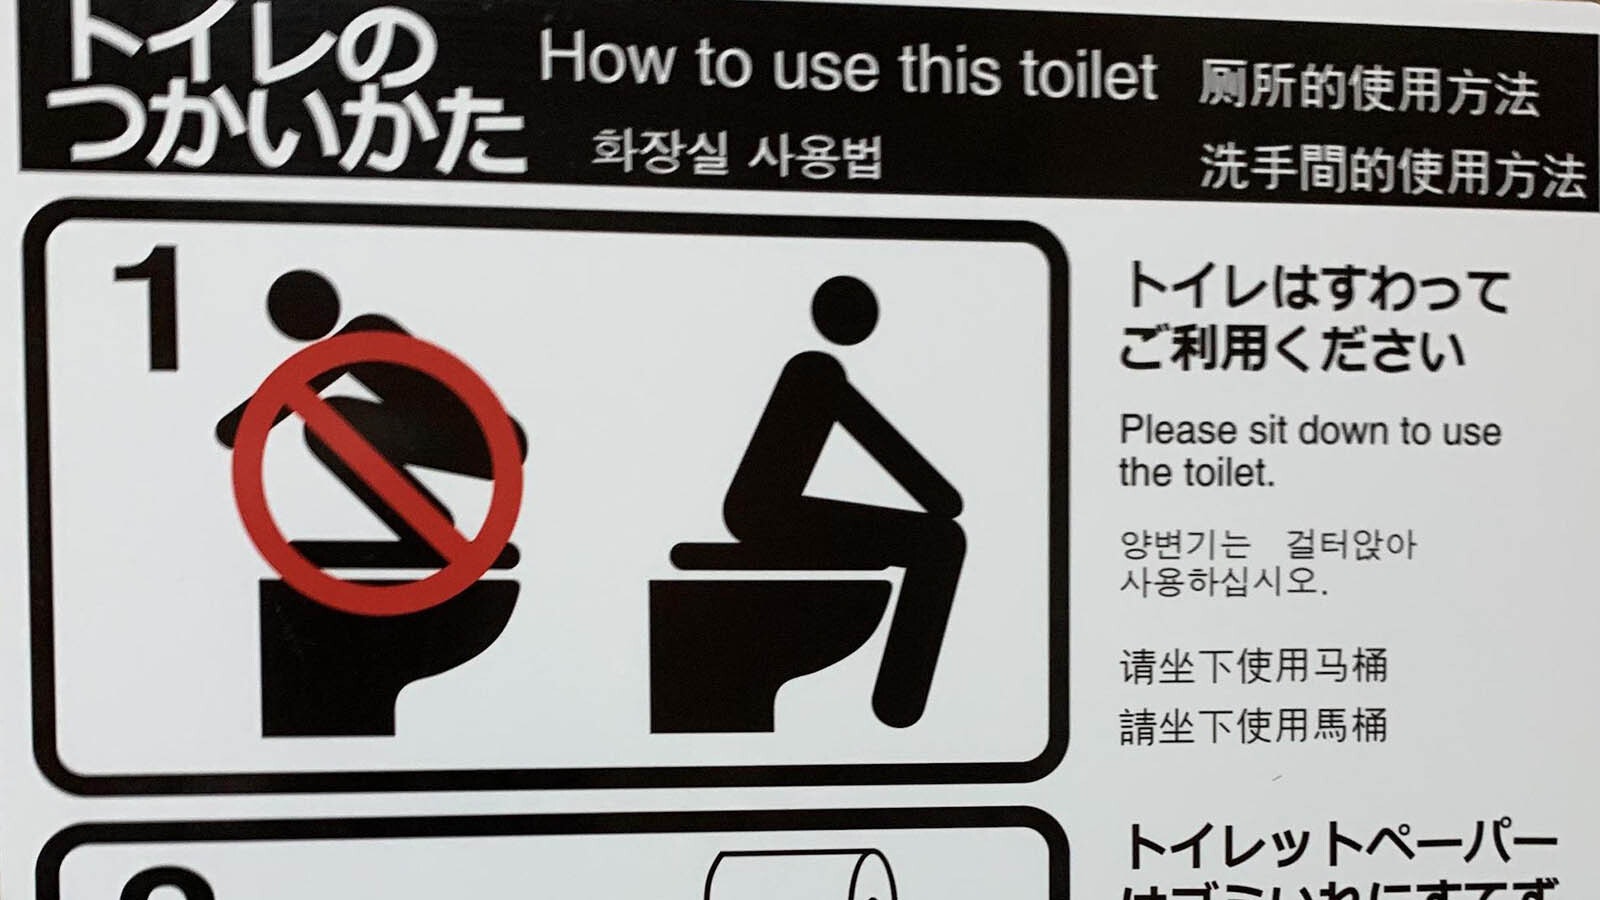 Signs at public restroom facilities in Yellowstone National Park have instructions in Chinese telling people to not stand and squat on toilet seats.